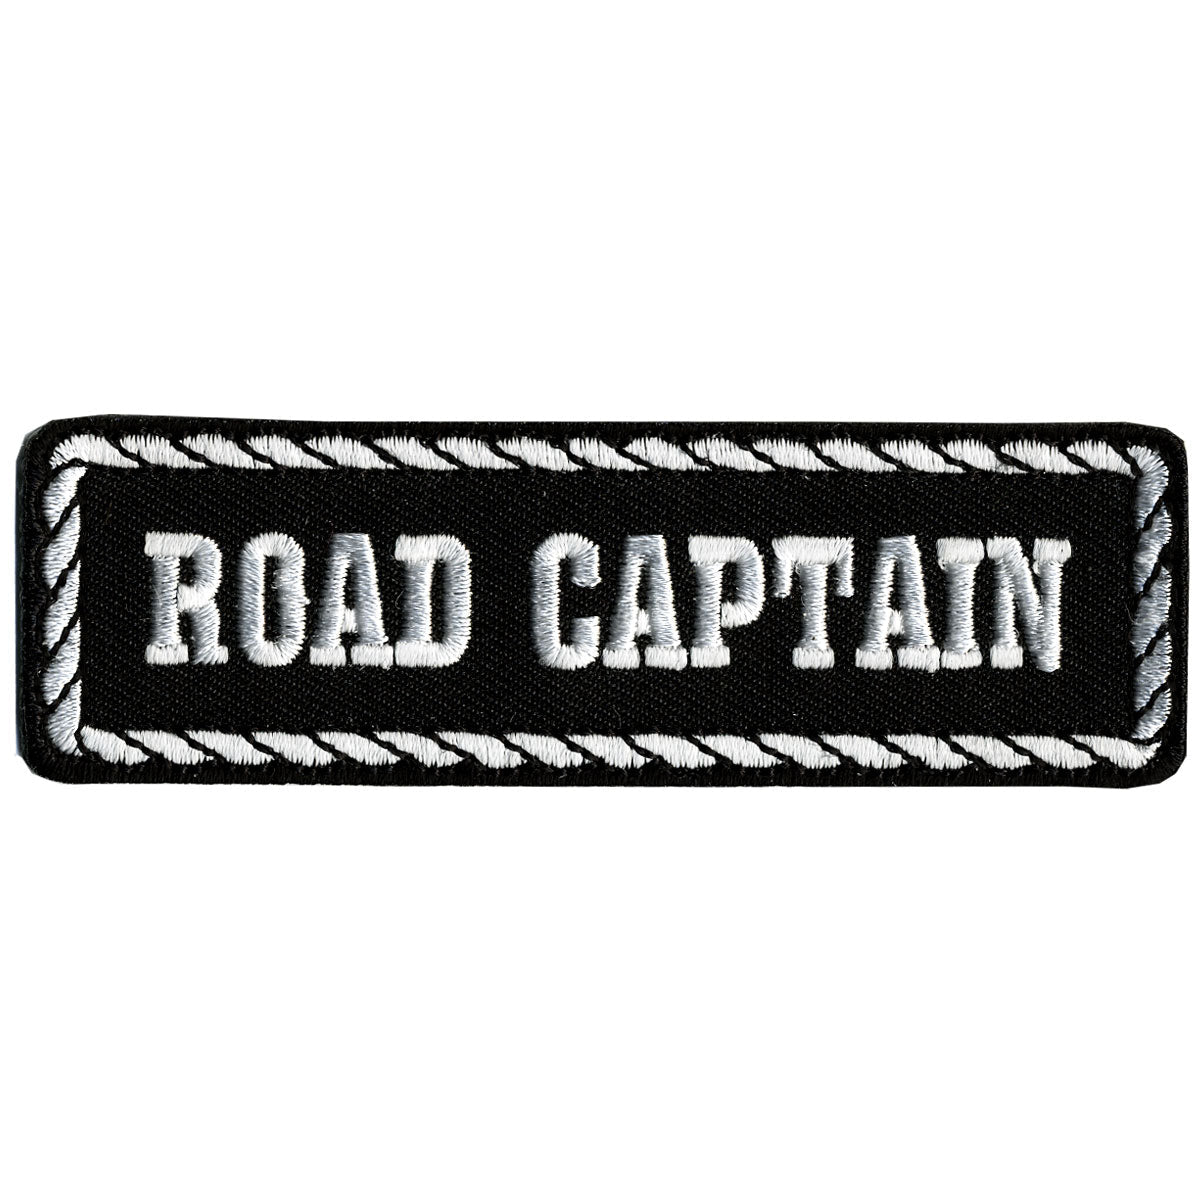 Hot Leathers Road Captain 4" x 1" Patch PPD1003